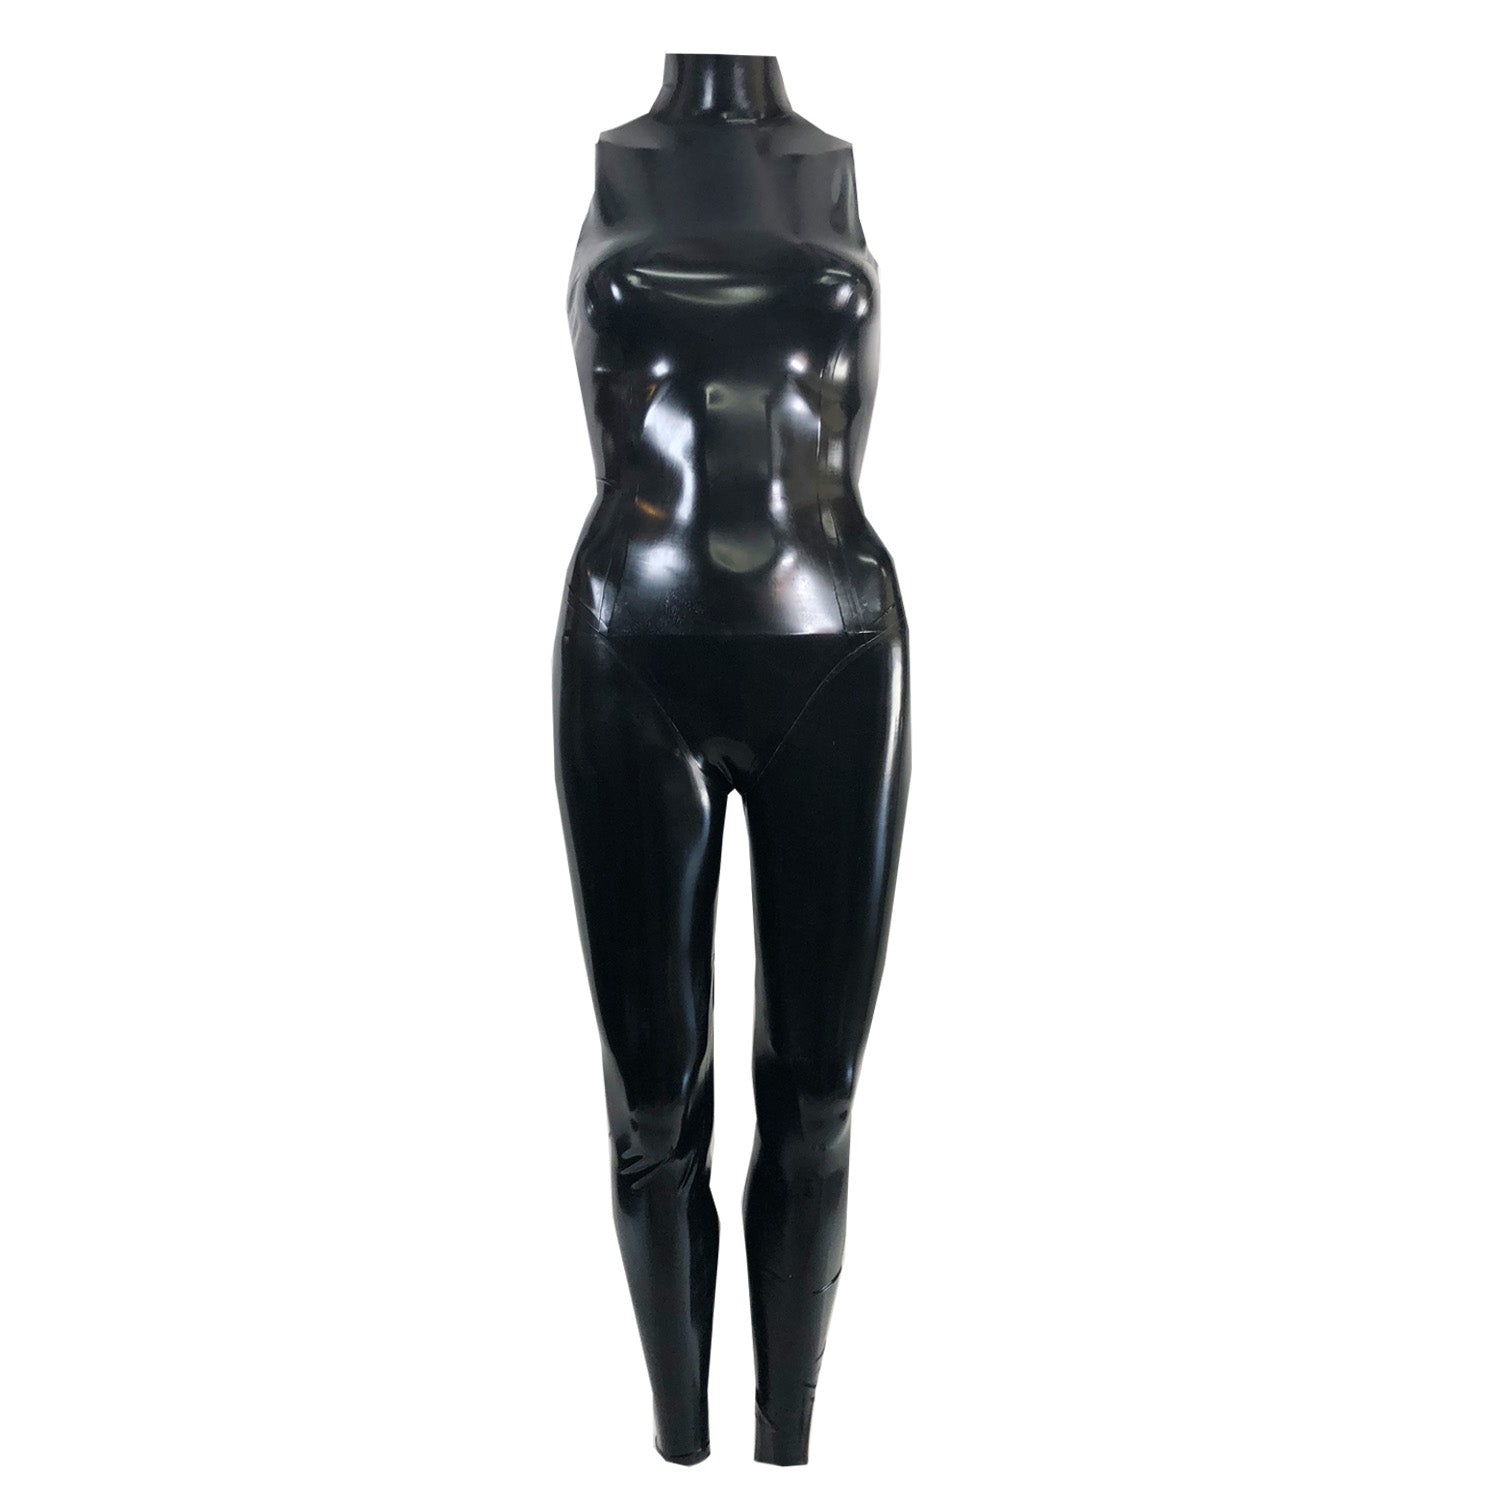 Sexy Black Latex Catsuit Skin Tights Full Body Suit Rubber